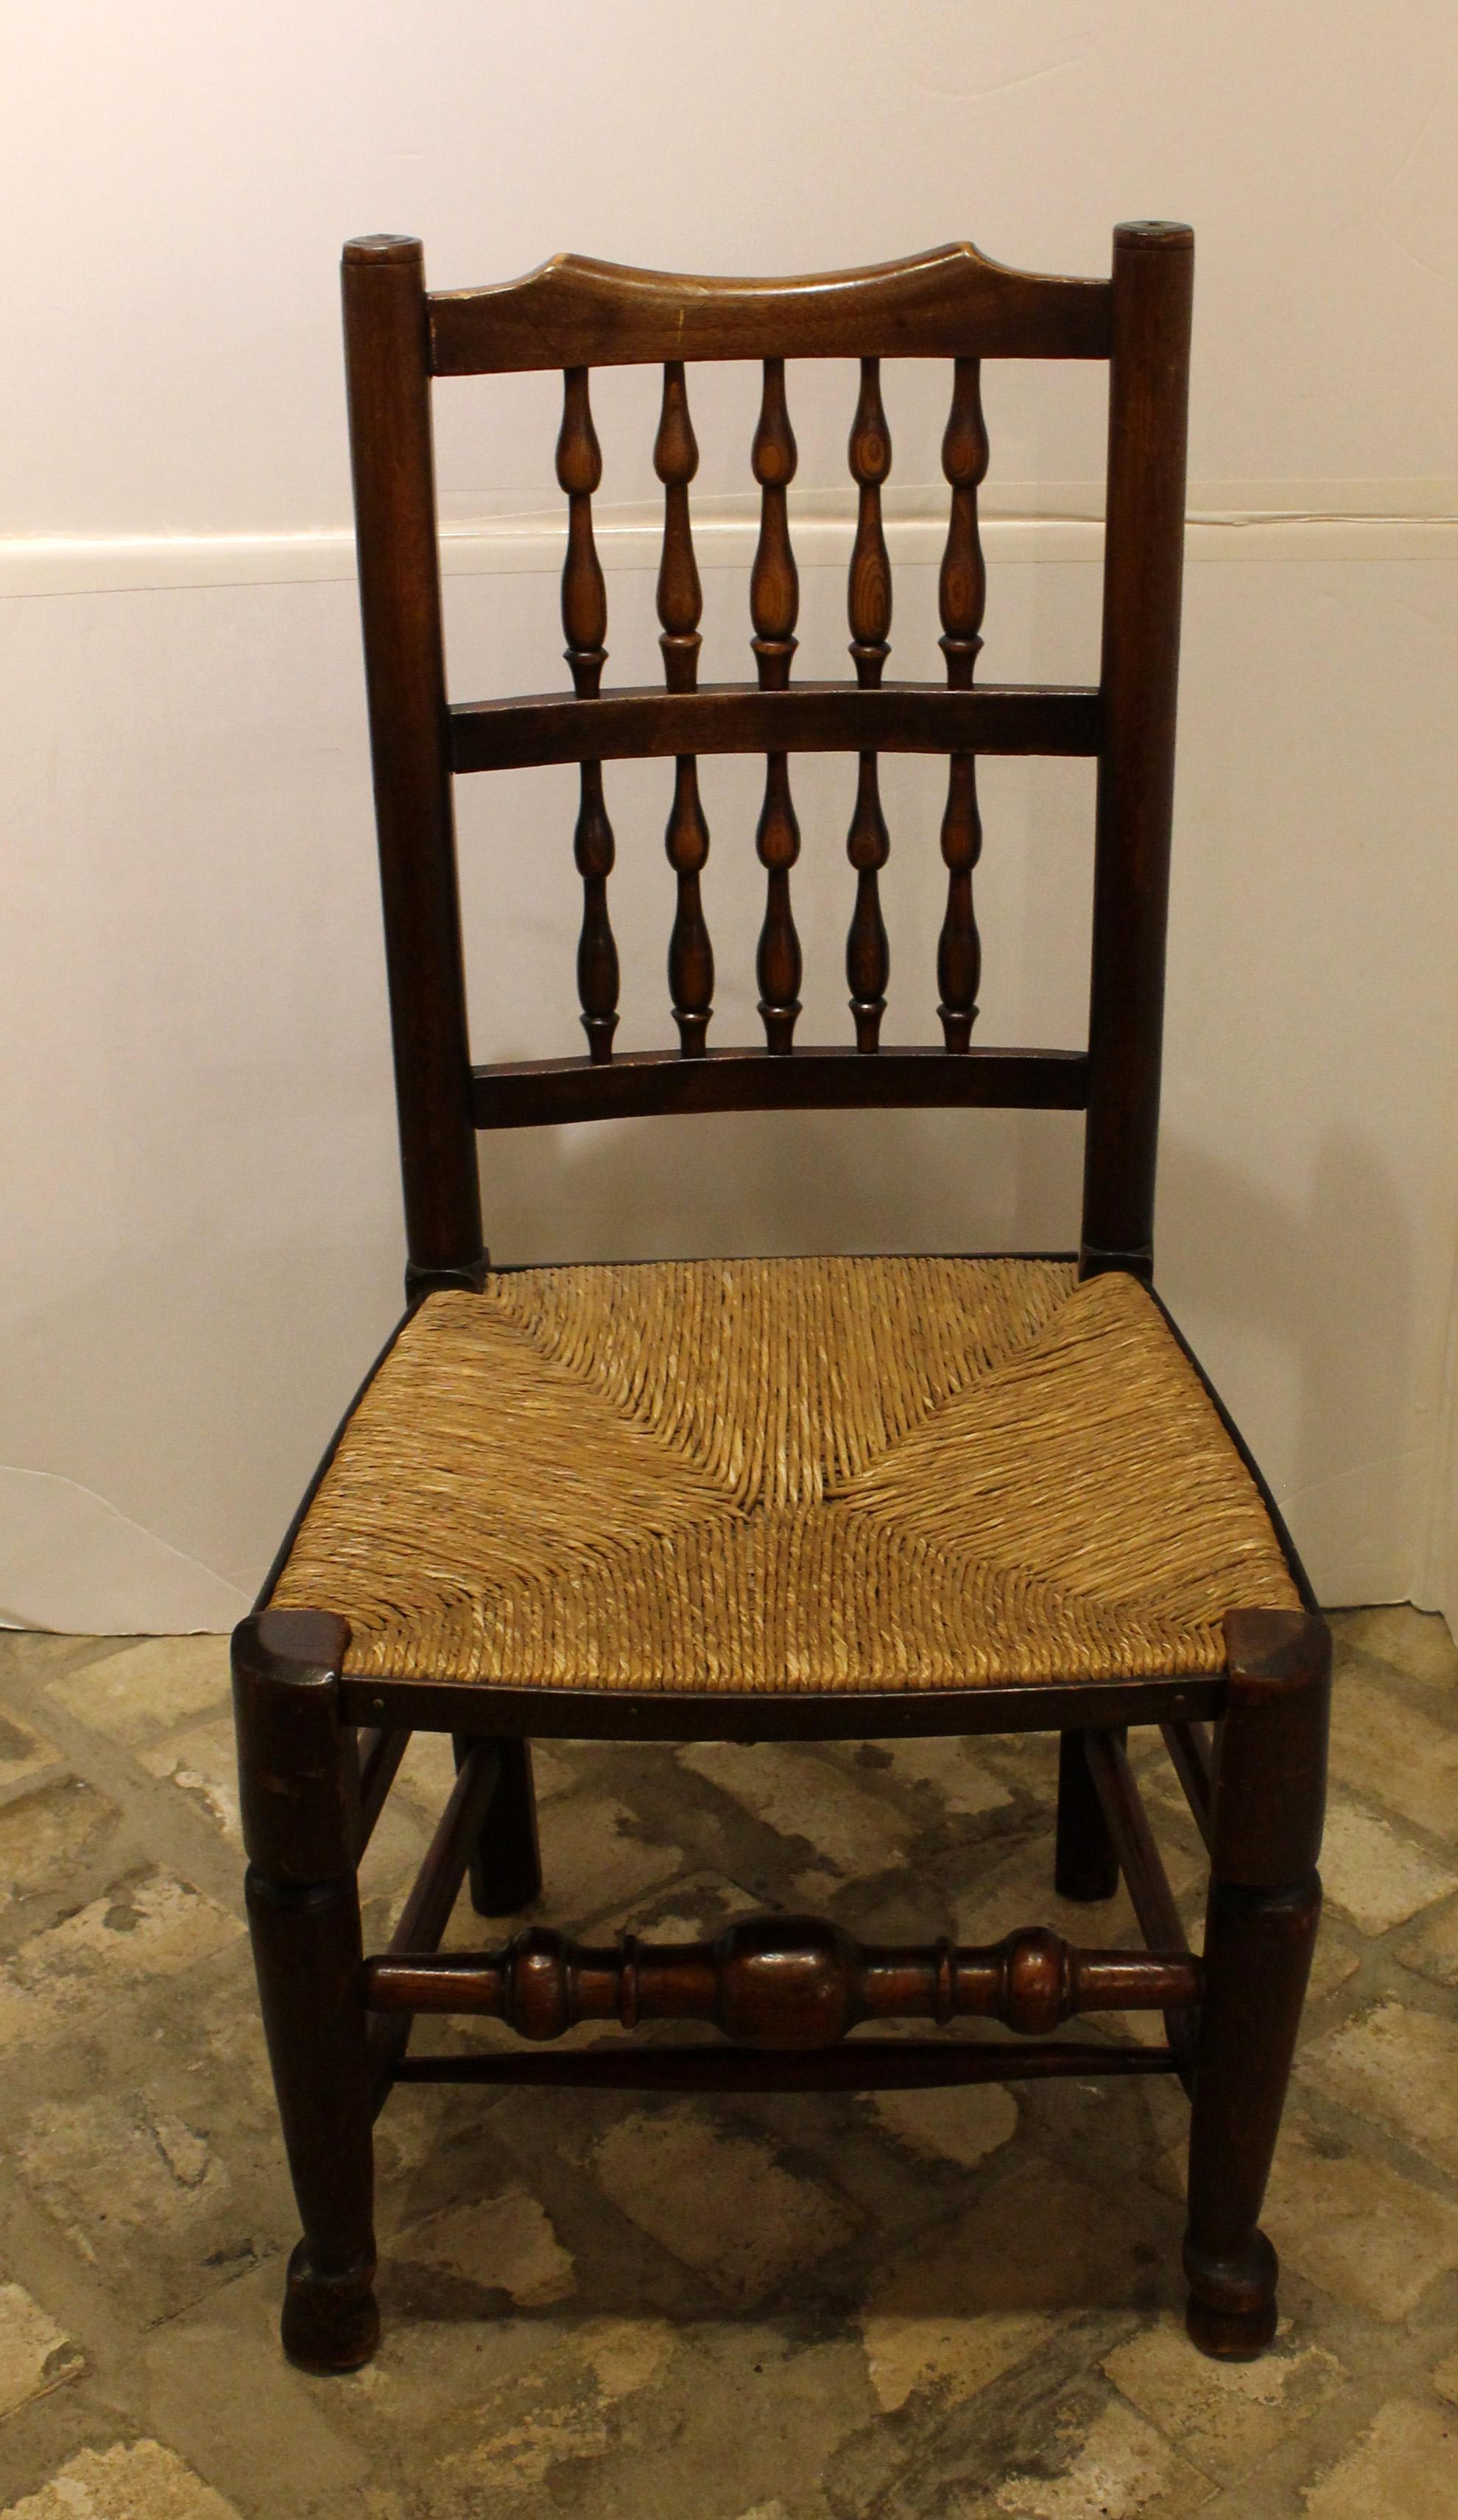 circa 1830 set of 8 English country dining chairs, Lancashire. Spindleback side chairs of ash & elm. Rush seats in good condition given age & use, some reworked. Nice color & patina. As is usual, an associated set with charming variations amongst